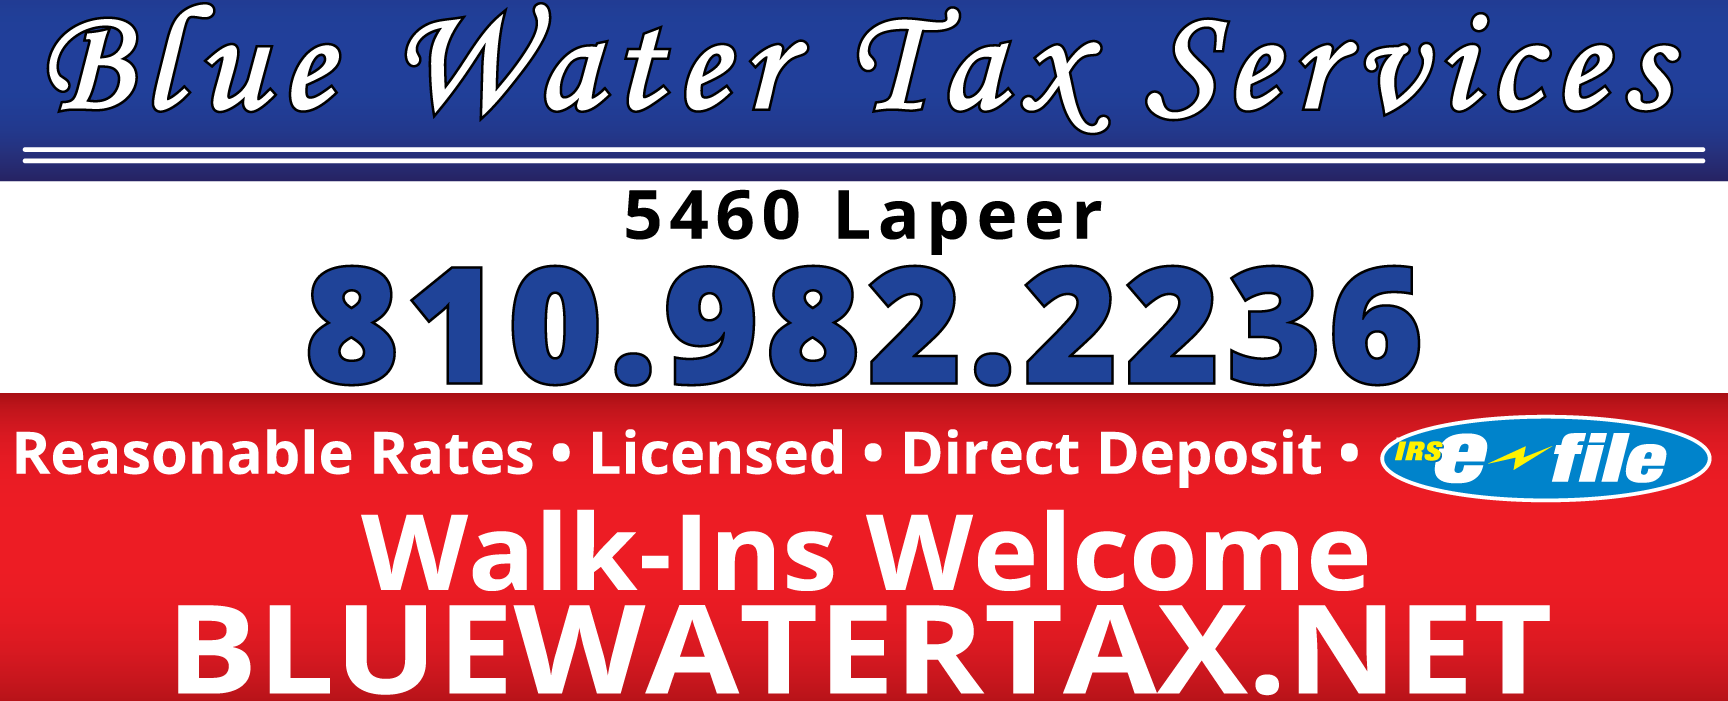 Blue Water Tax Services